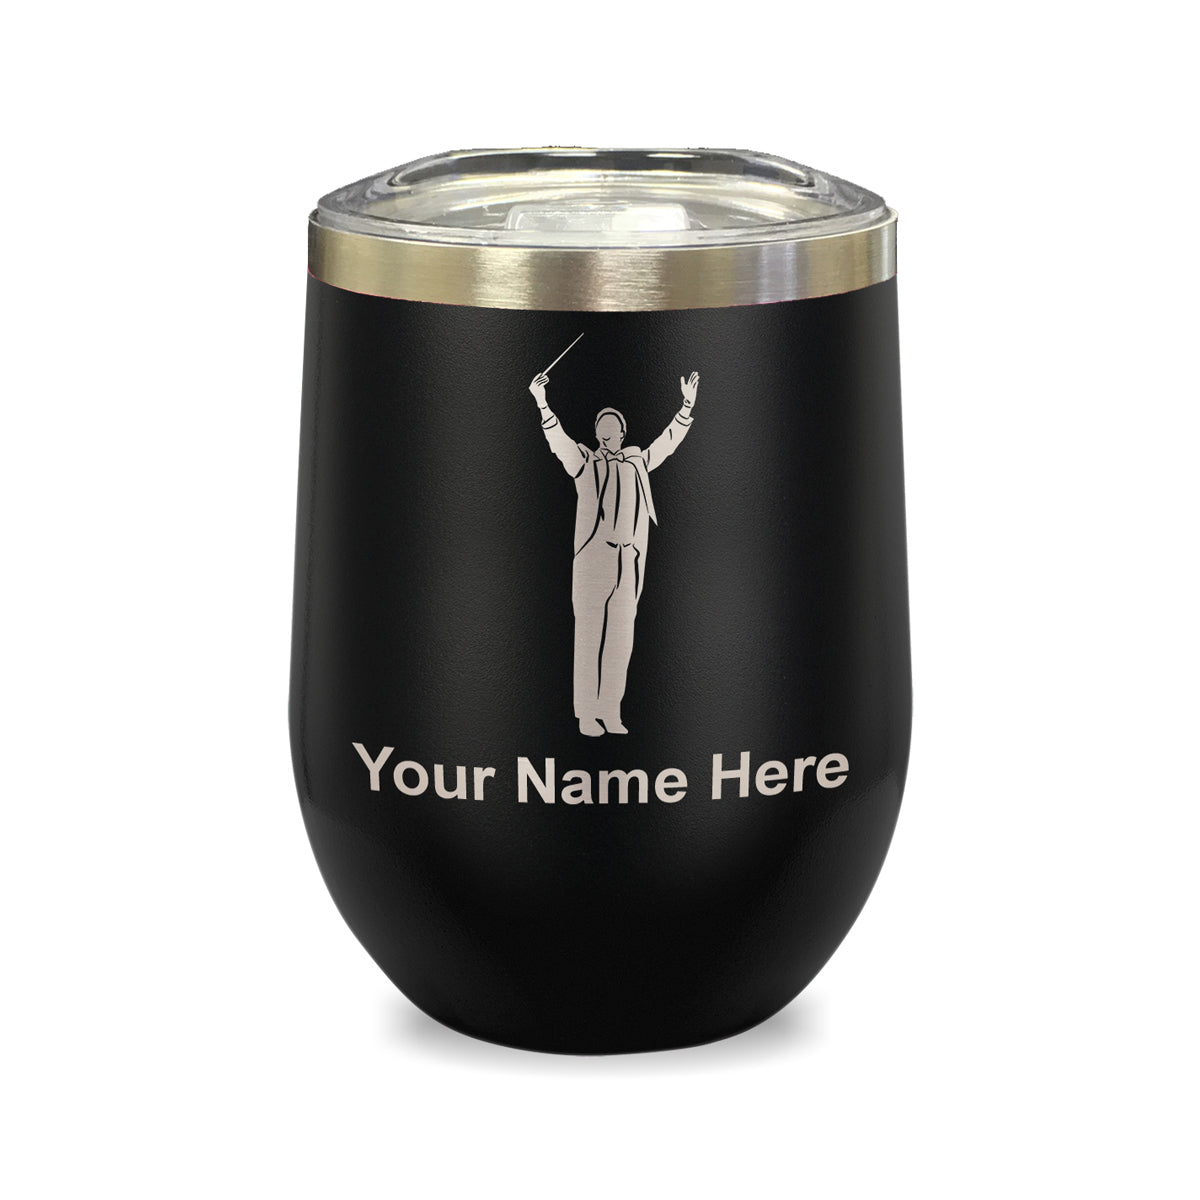 LaserGram Double Wall Stainless Steel Wine Glass, Band Director, Personalized Engraving Included